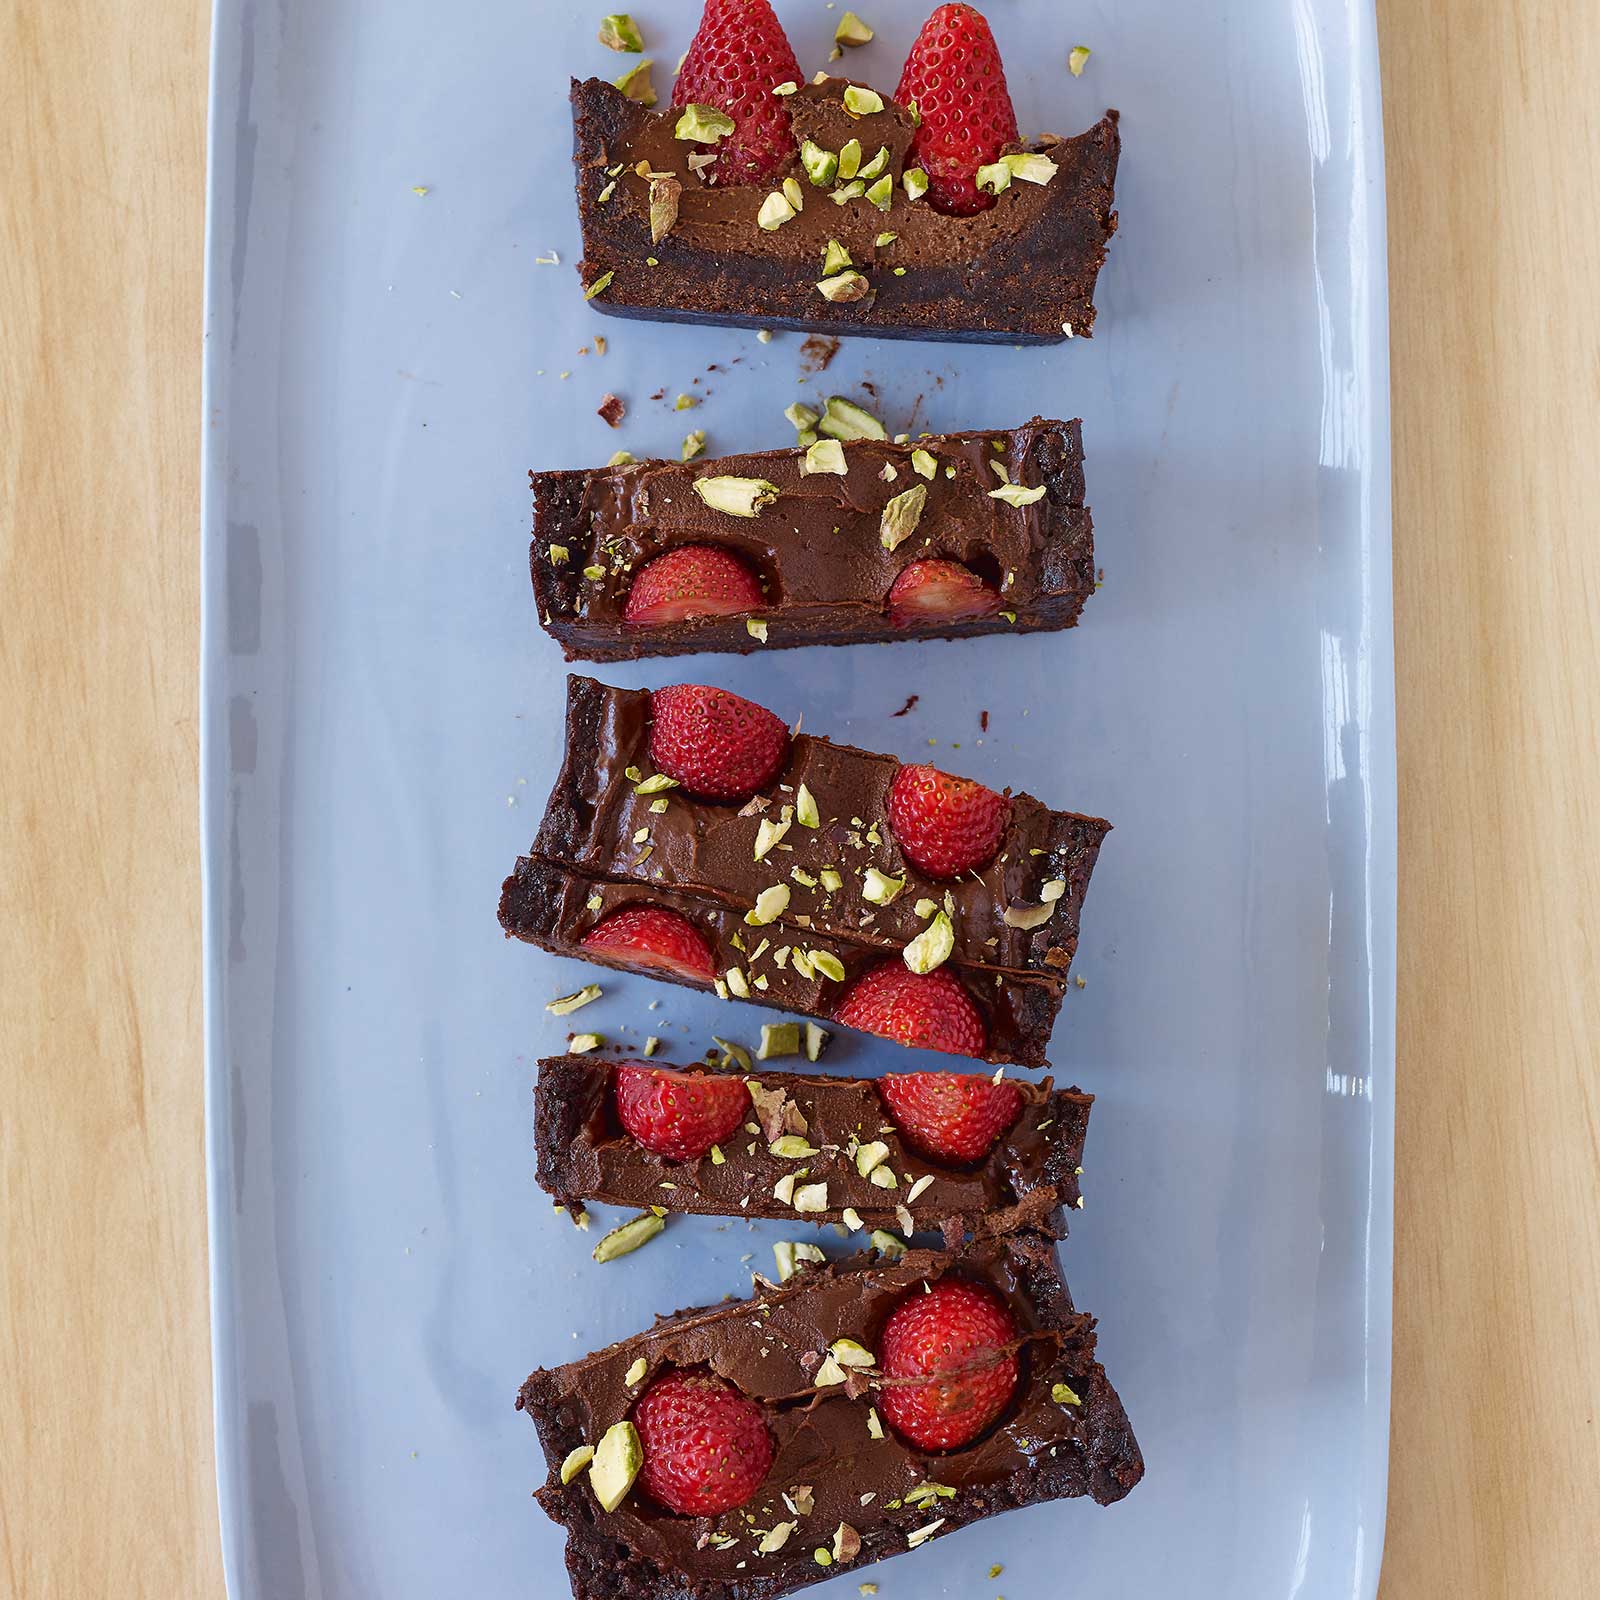 A vegan chocolate tart, sliced into rectangular pieces sitting on a blue platter. The tart is topped with fresh raspberries and crushed pistachio.